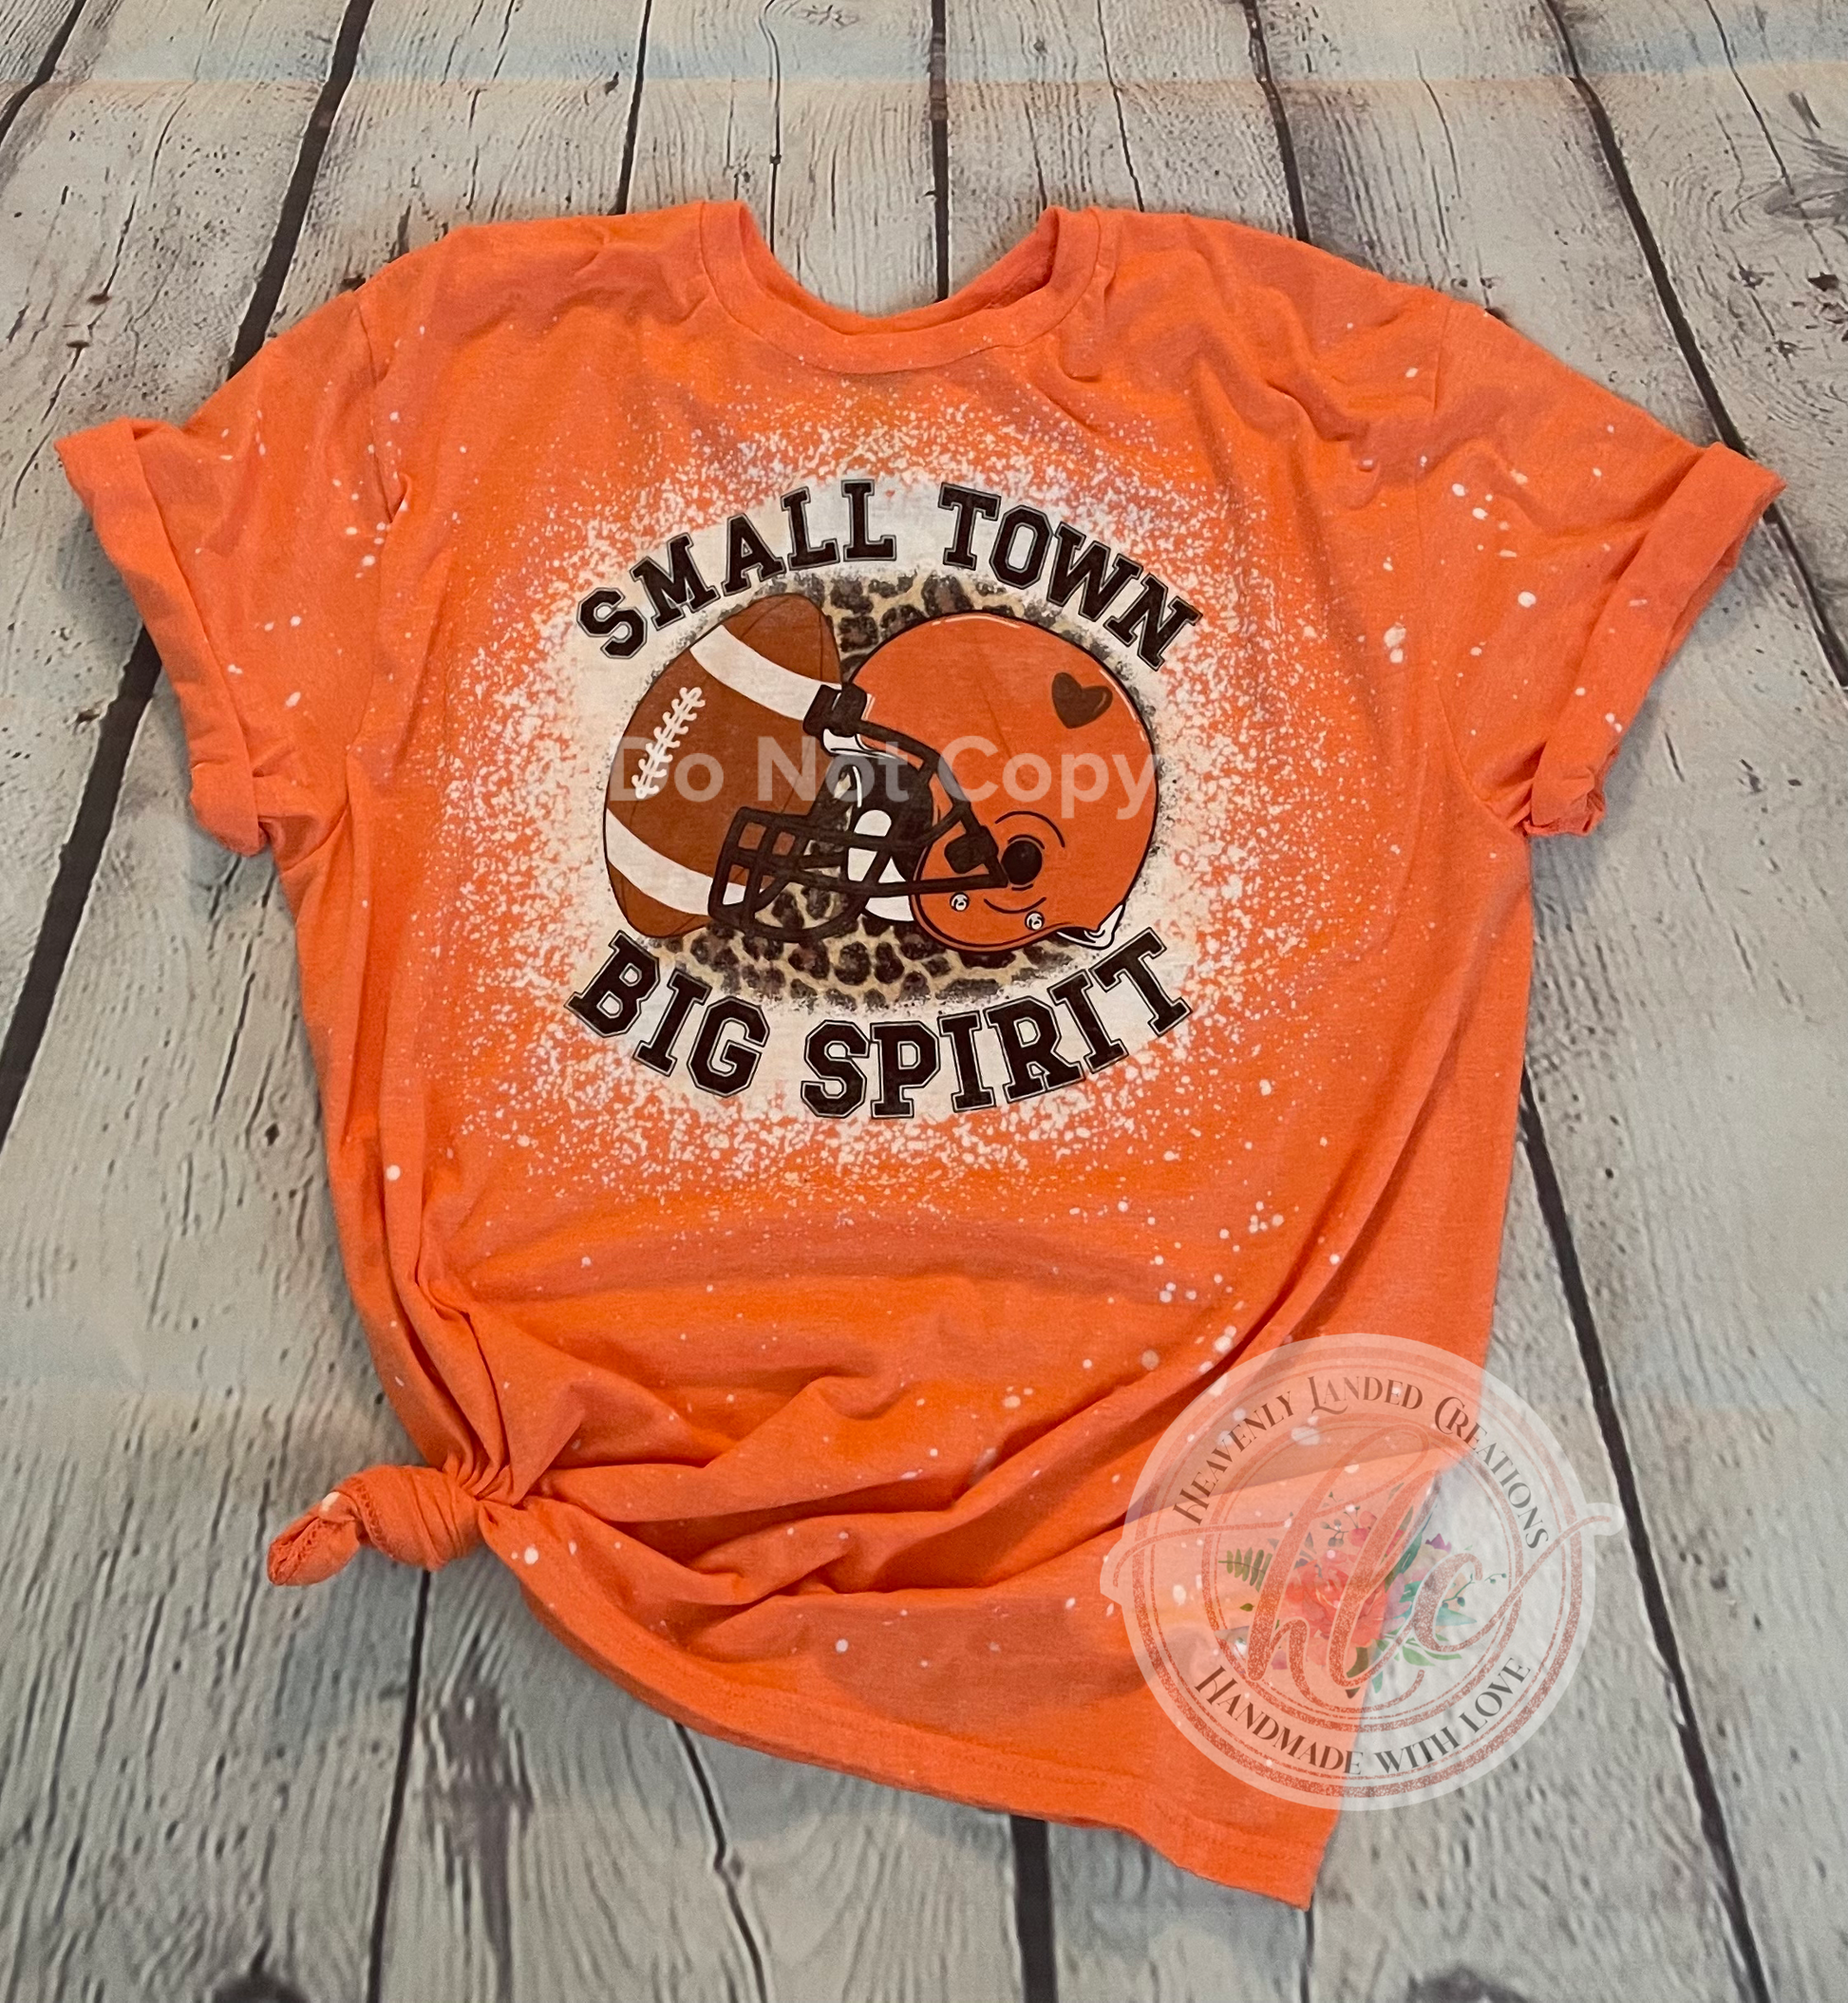 Bleached Tee Football Small Town